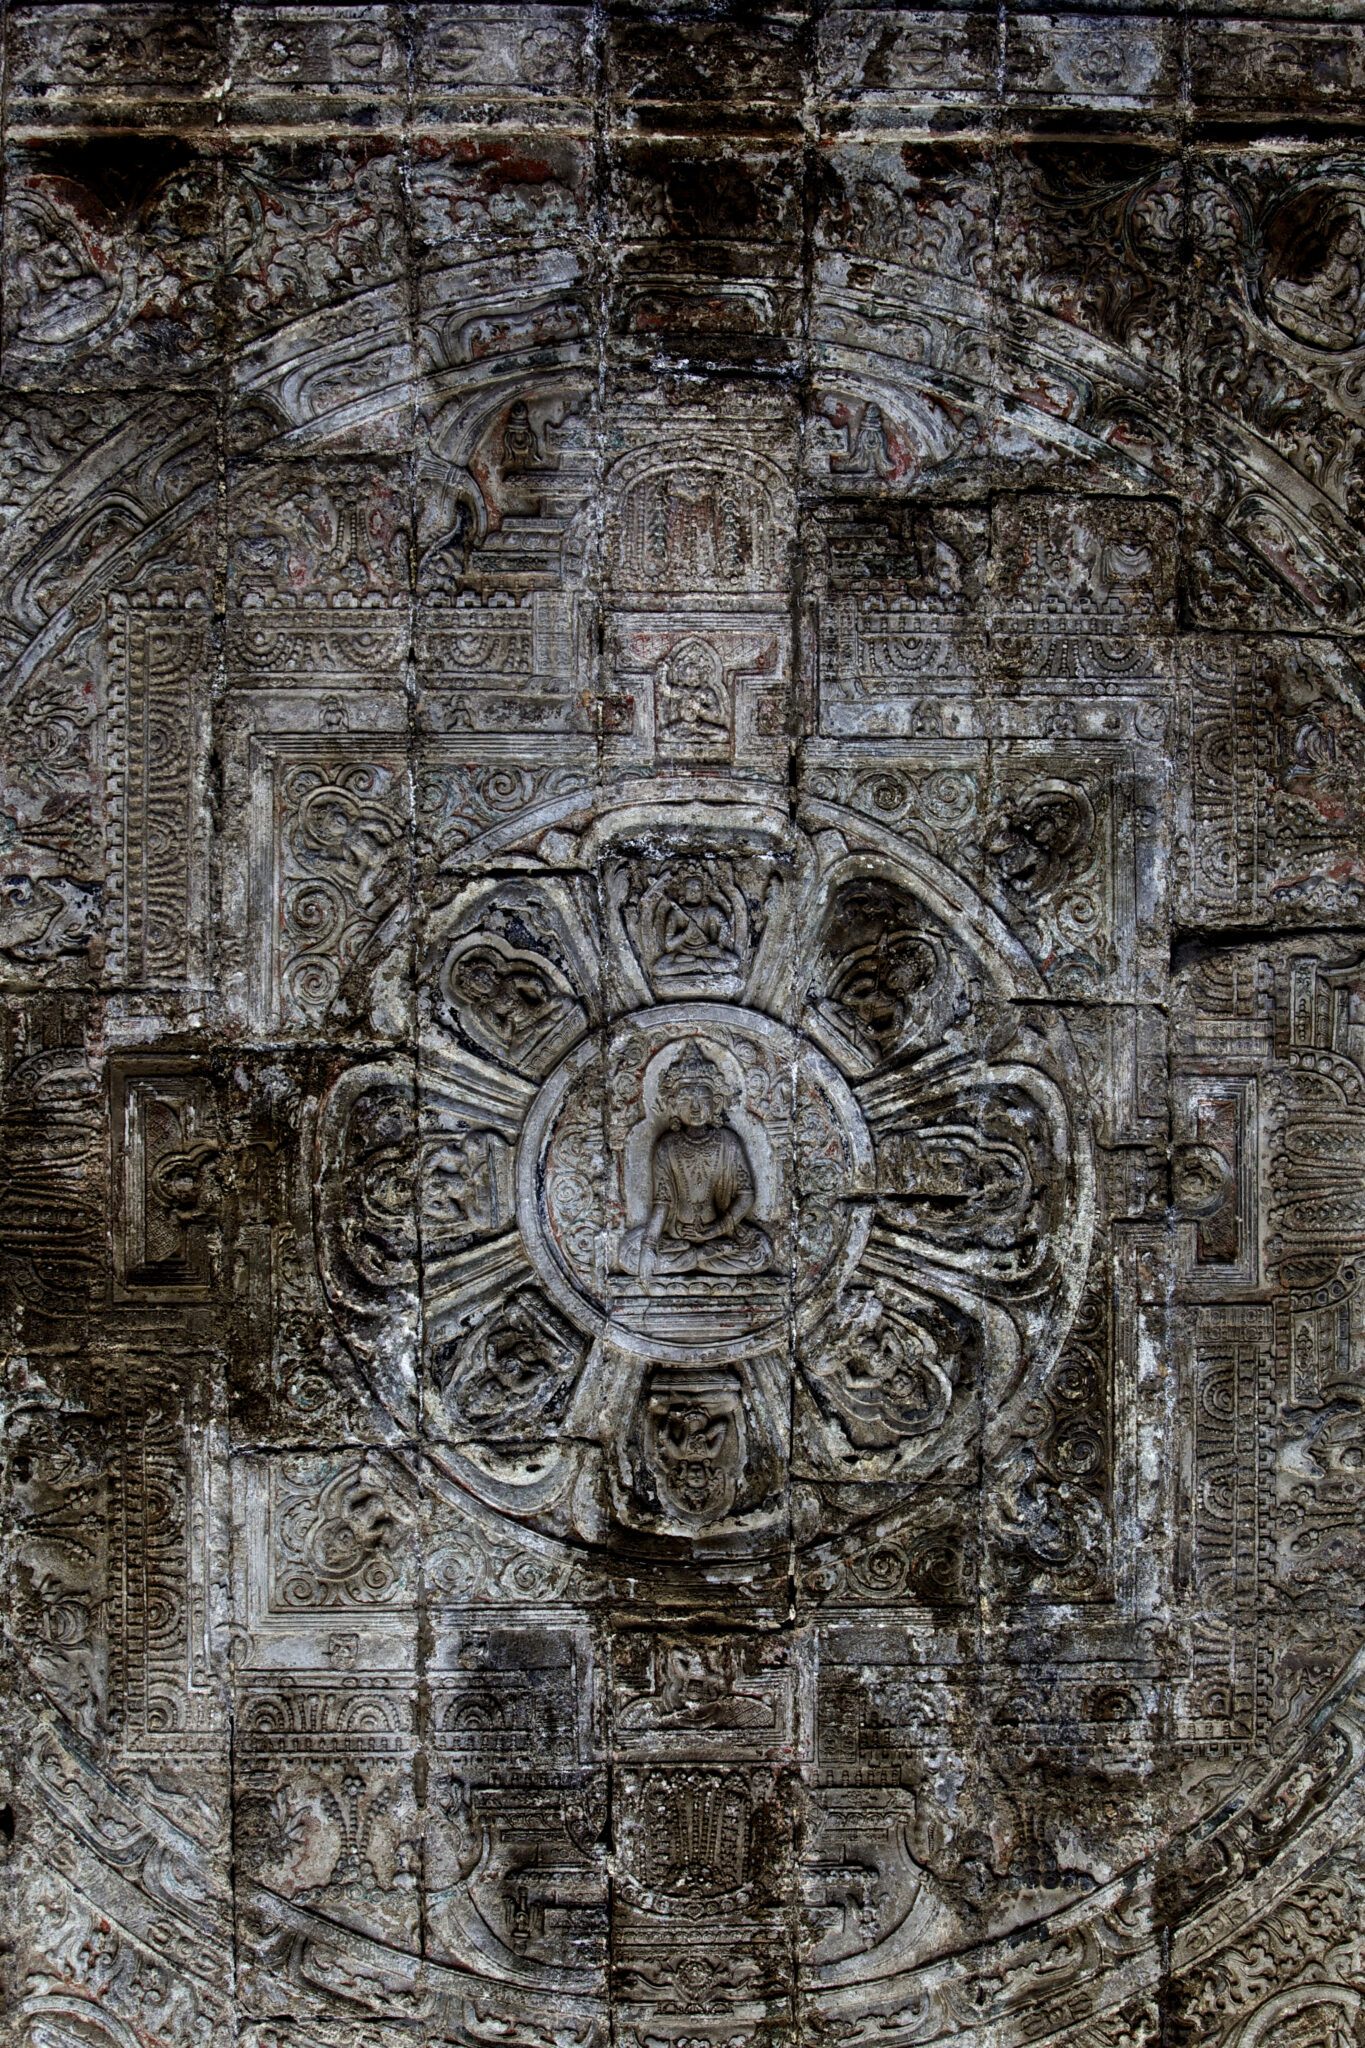 View from below of weathered, mottled, densely carved stone mandala featuring seated Buddha at center